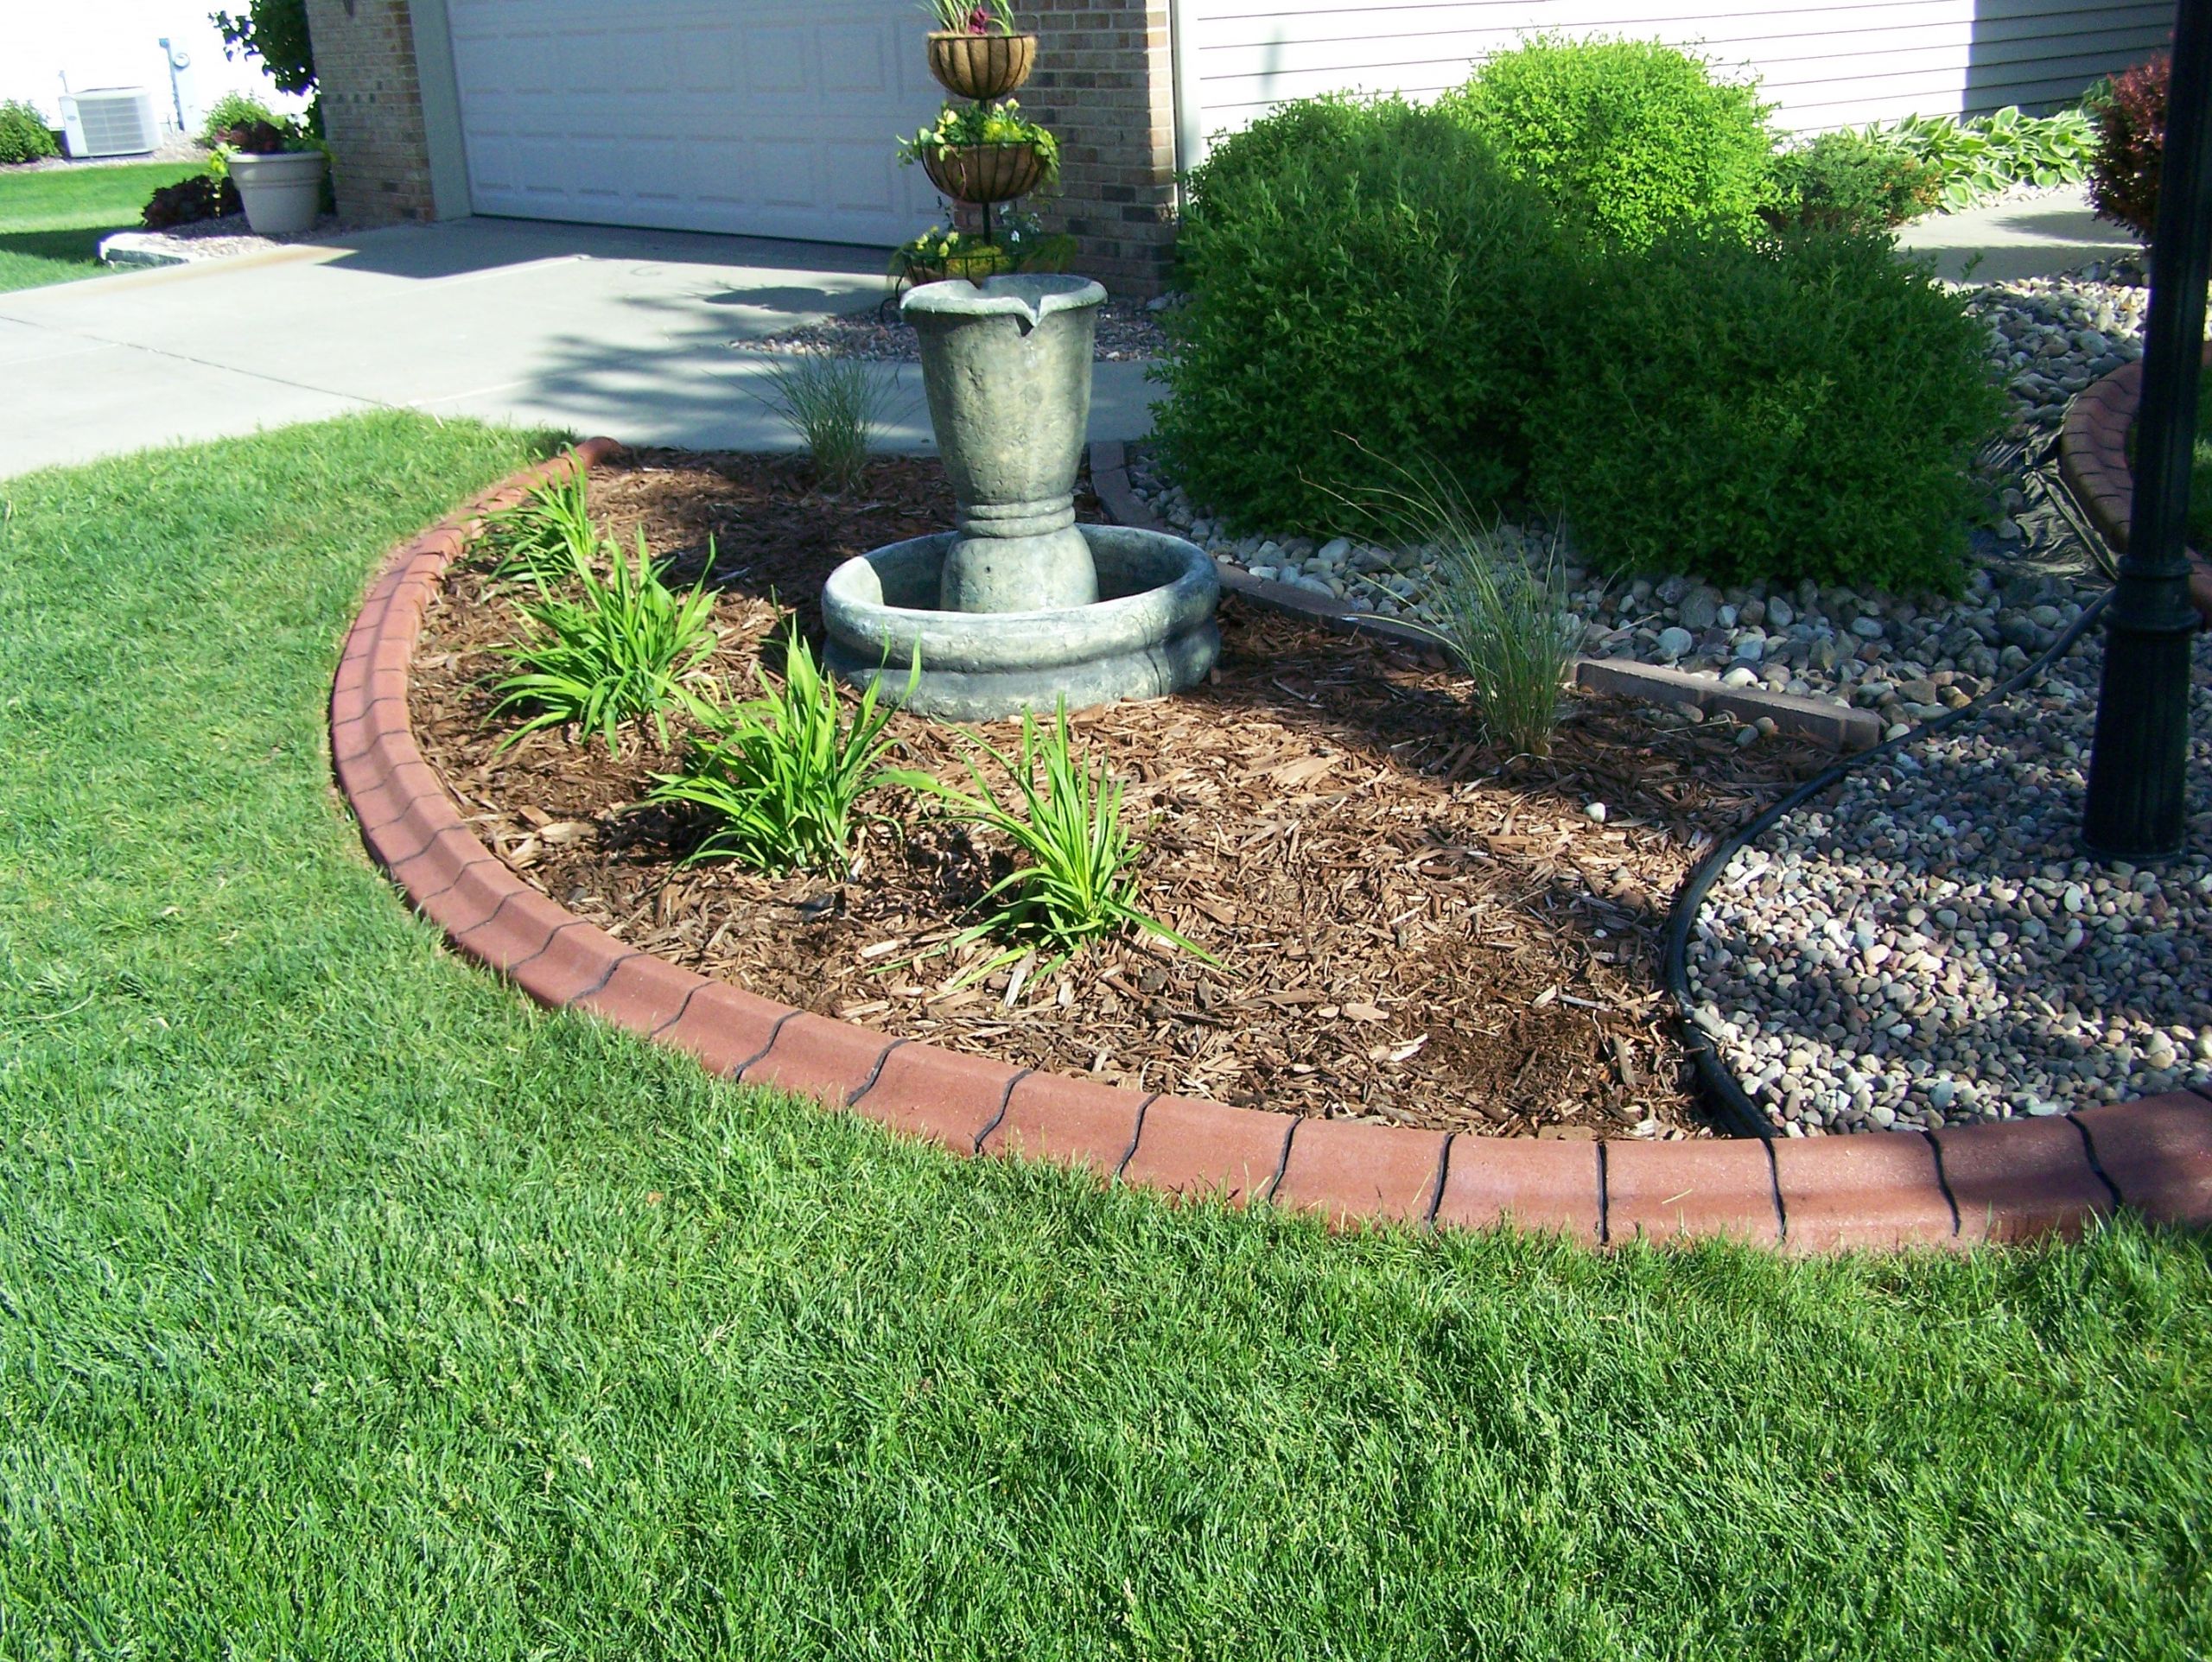 Metal Landscape Edging Home Depot
 Landscaping How To Install Home Depot Stone Edging For